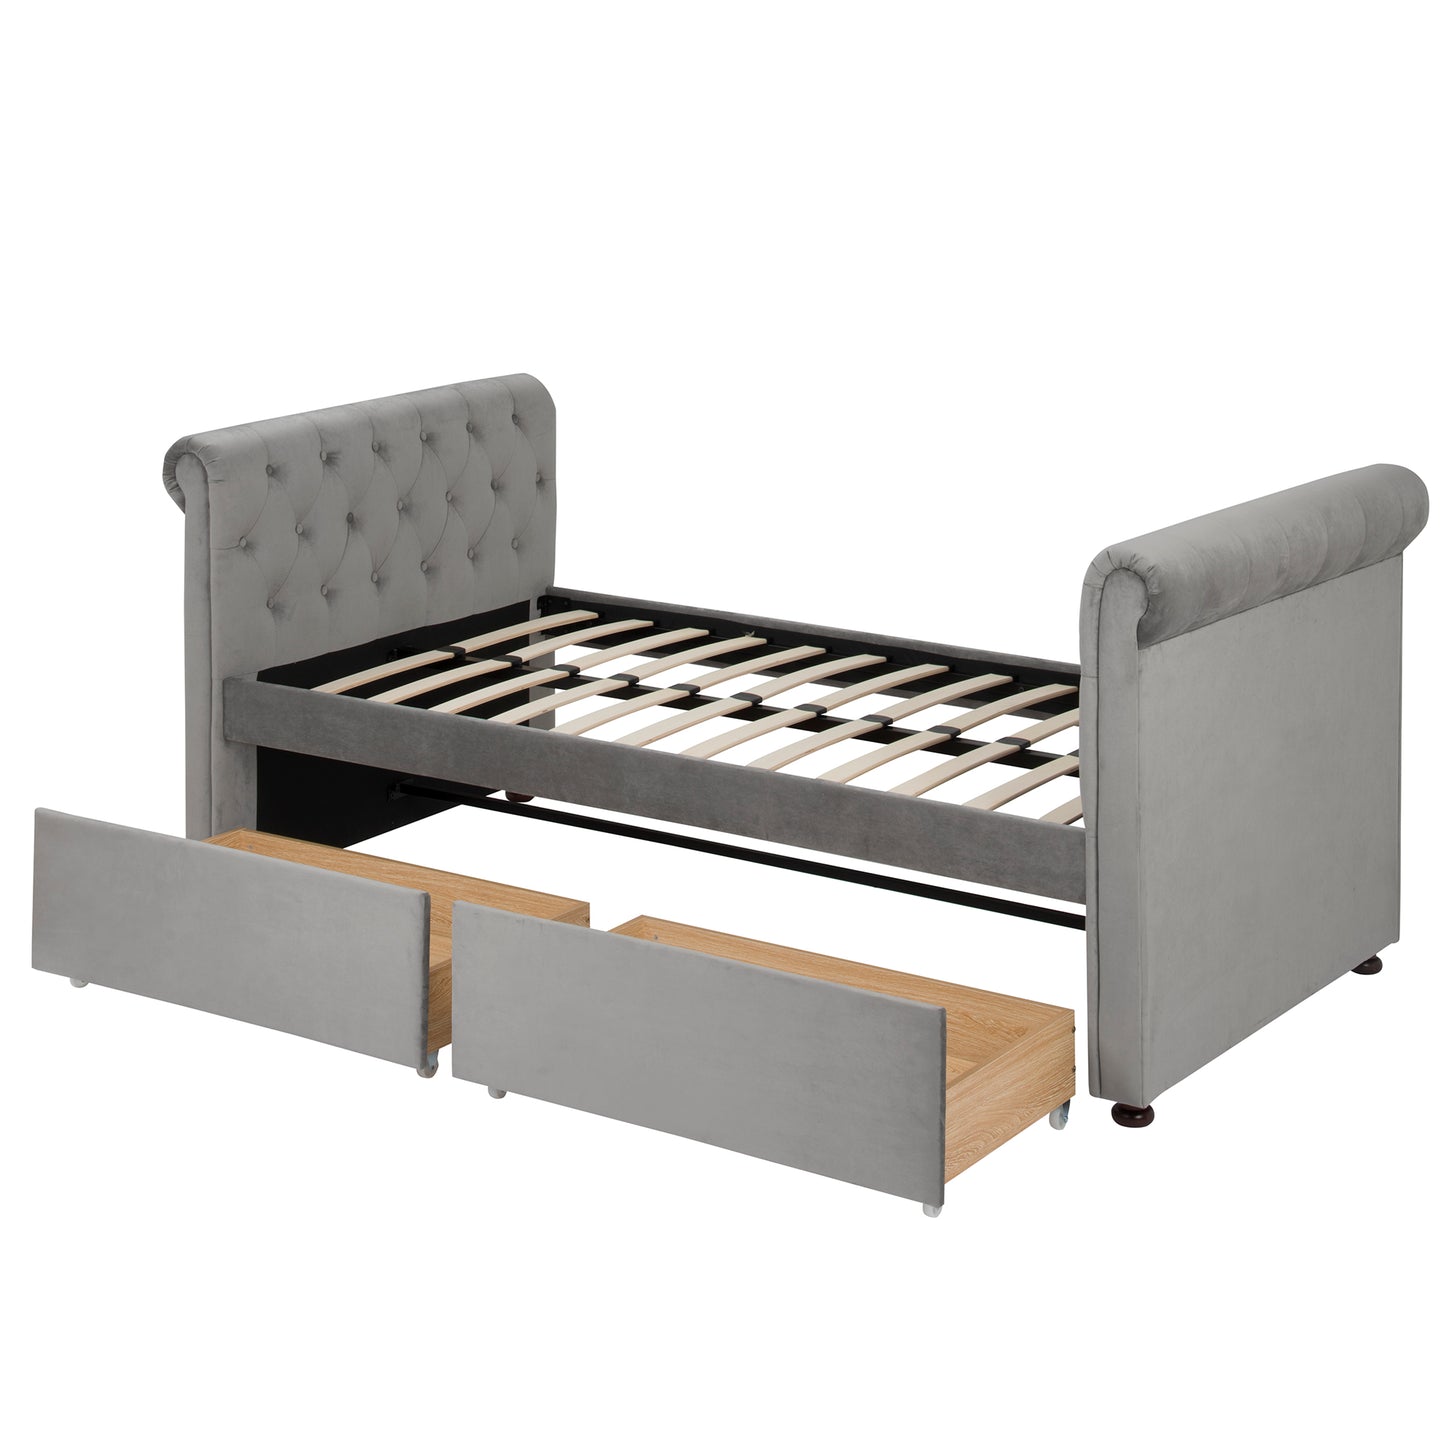 Twin Size Upholstered daybed with Two Drawers, Wood Slat Support, Gray